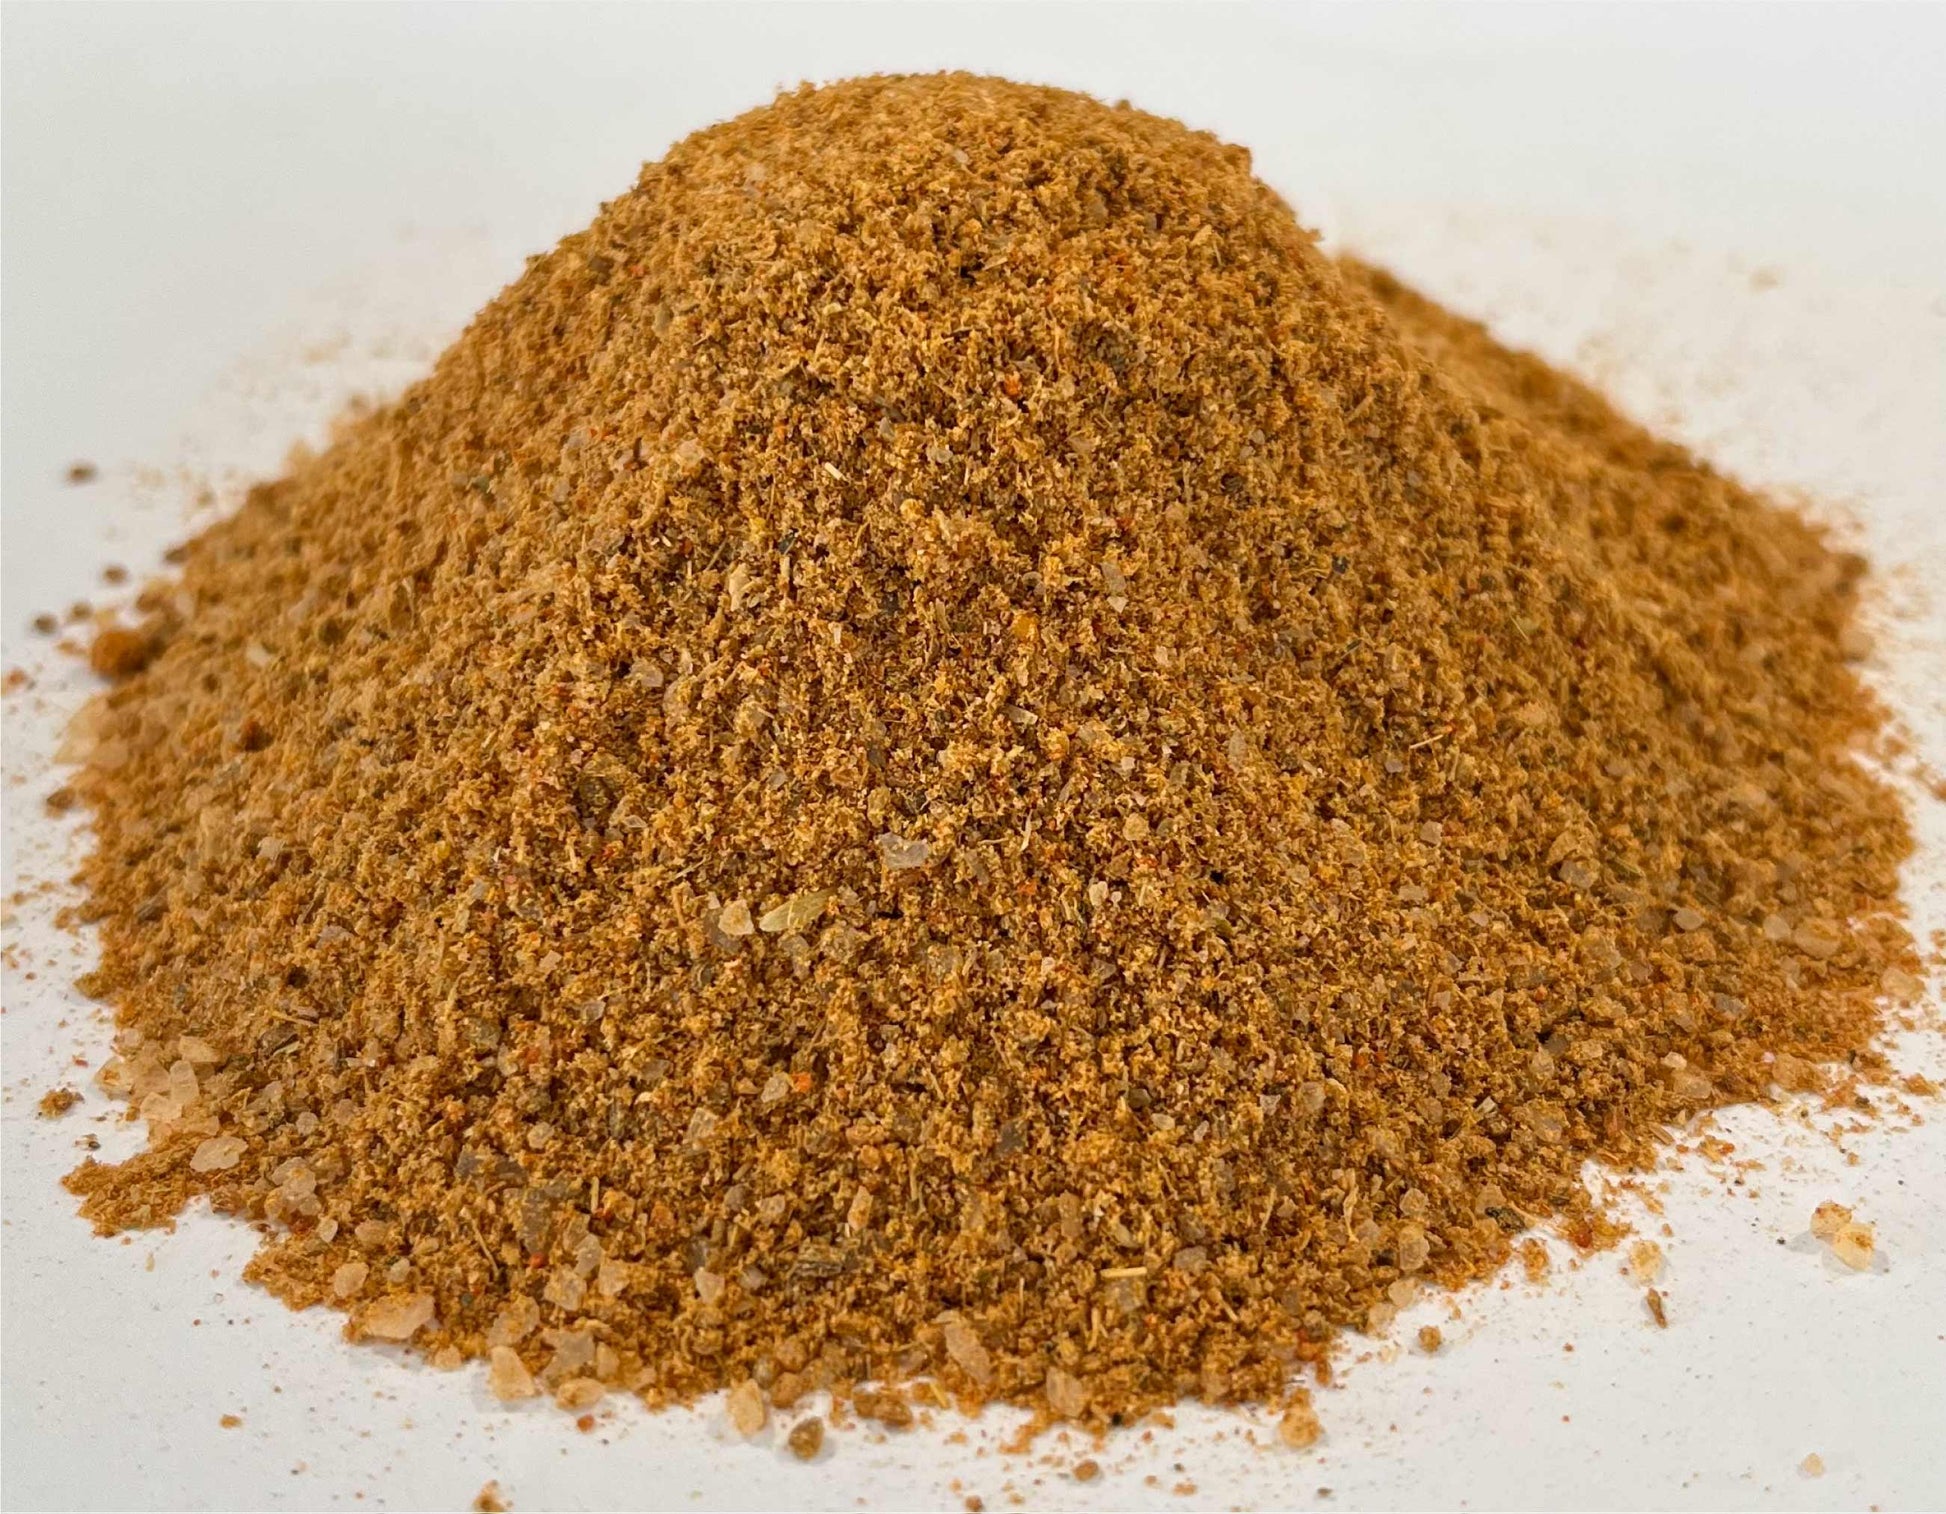 A mixture of spices and herbs - Adjika spice Mound.